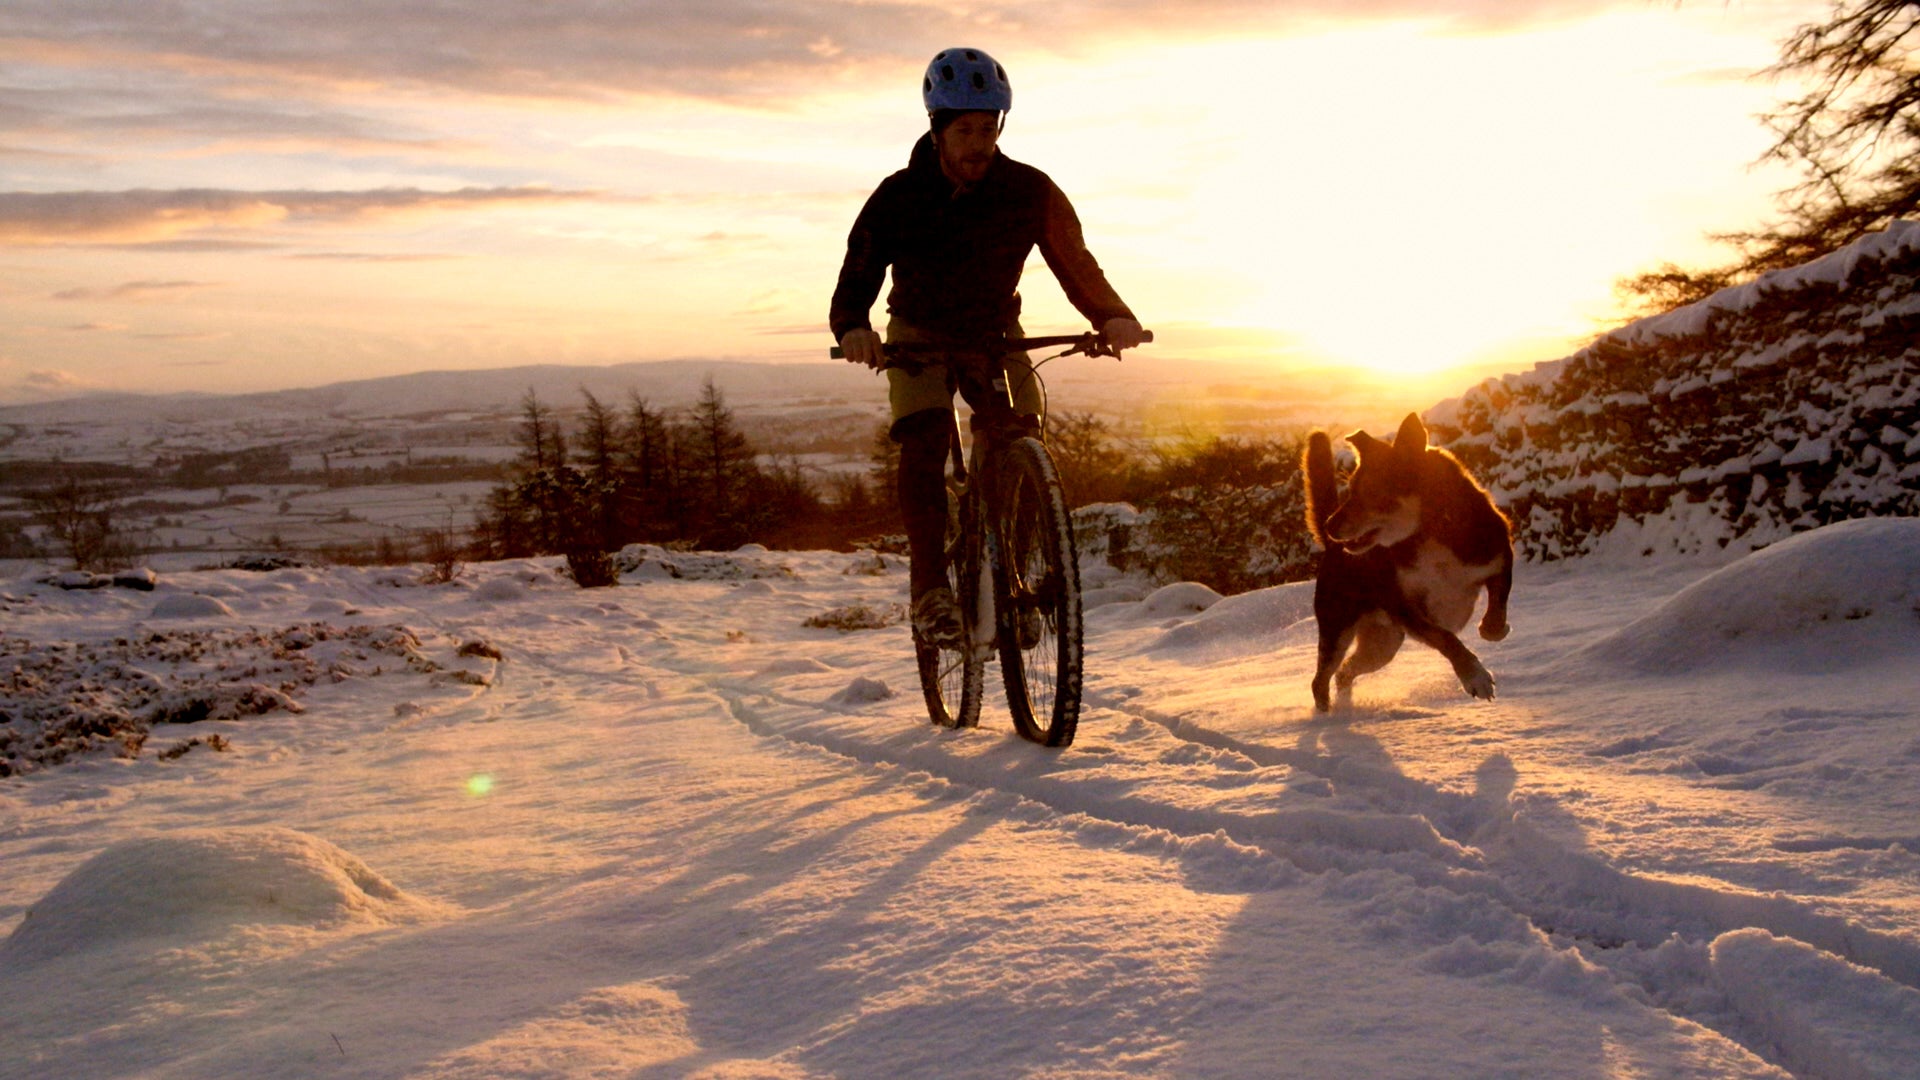 Mountain biking in snow with a dog running alongside